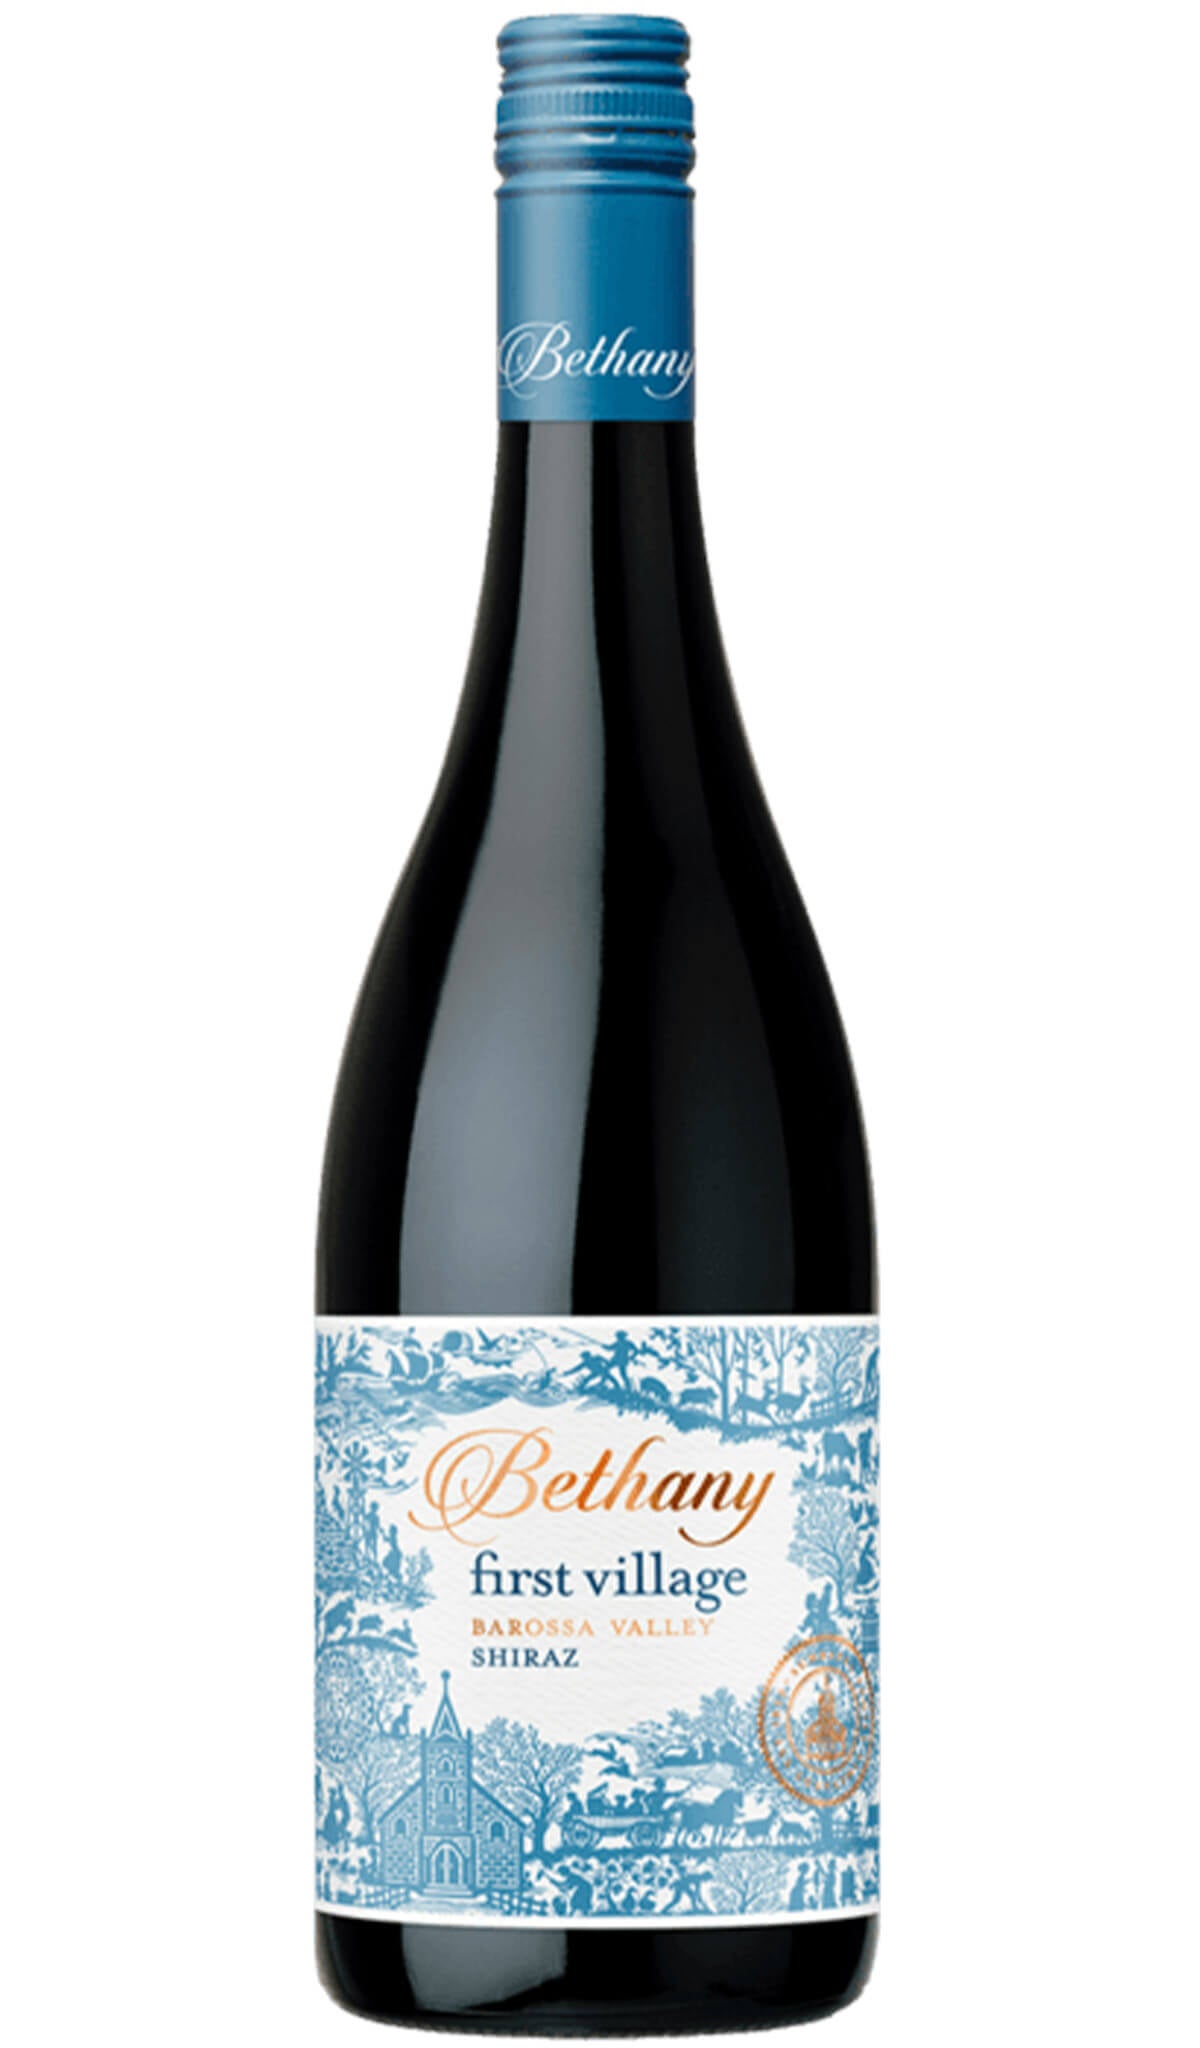 Find out more or buy Bethany First Village Shiraz 2021 (Barossa Valley) online at Wine Sellers Direct - Australia’s independent liquor specialists.